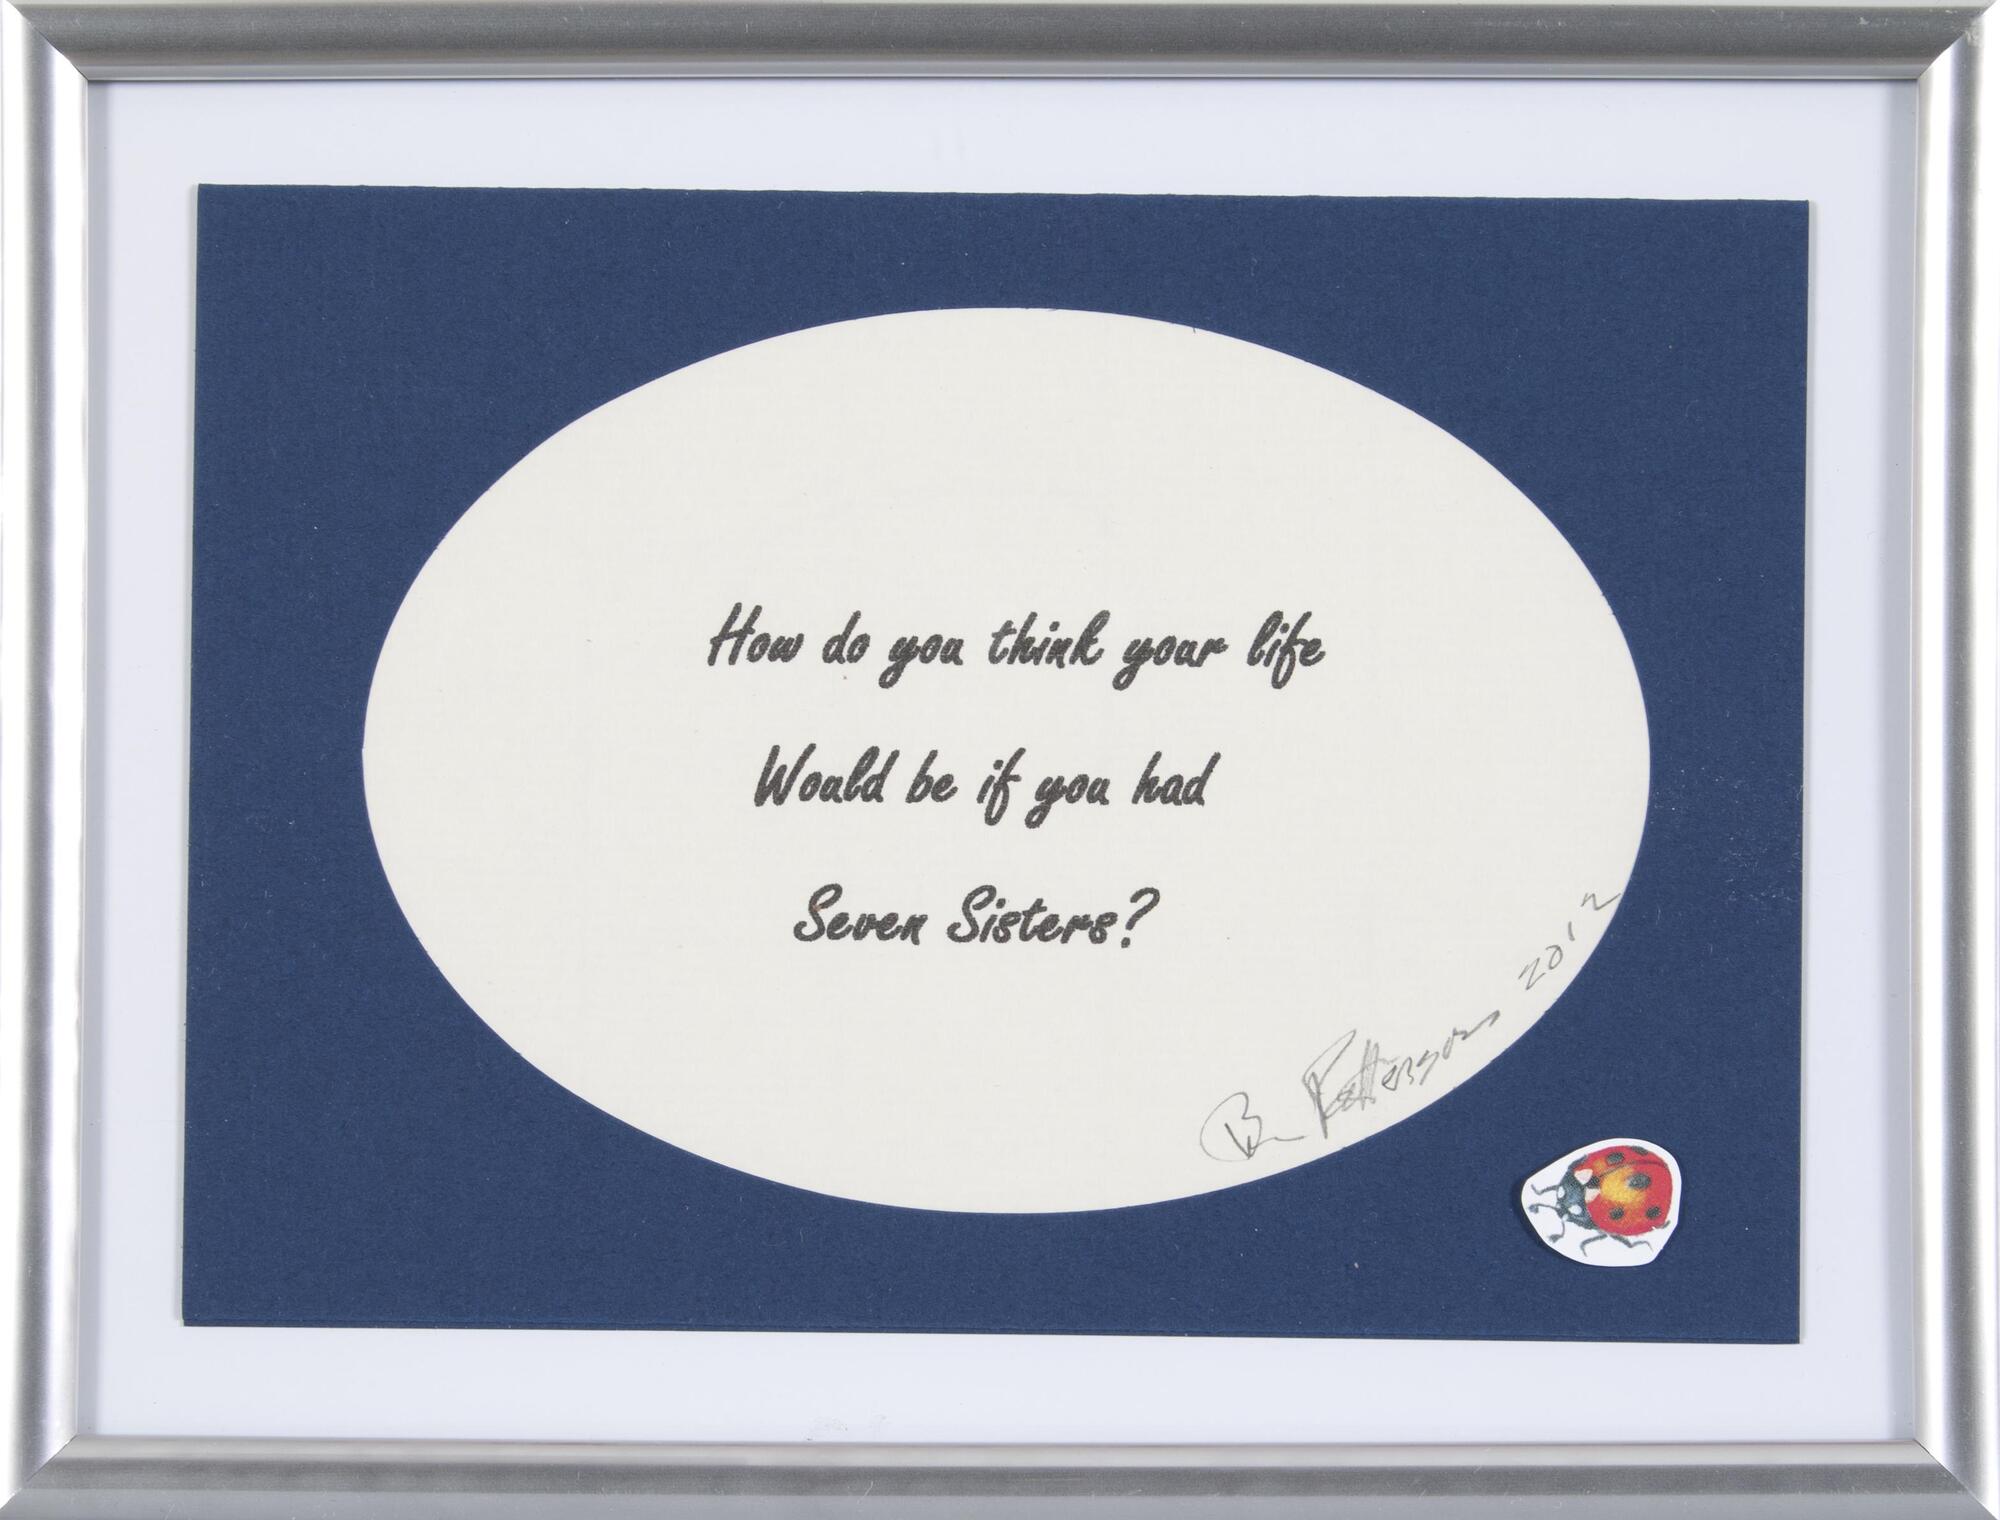 The phrase "How do you think your life Would be if you had Seven Sisters?" is digitally printed on paper and signed by artist then placed in a mass produced frame with a ladybug sticker in the lower right corner. 